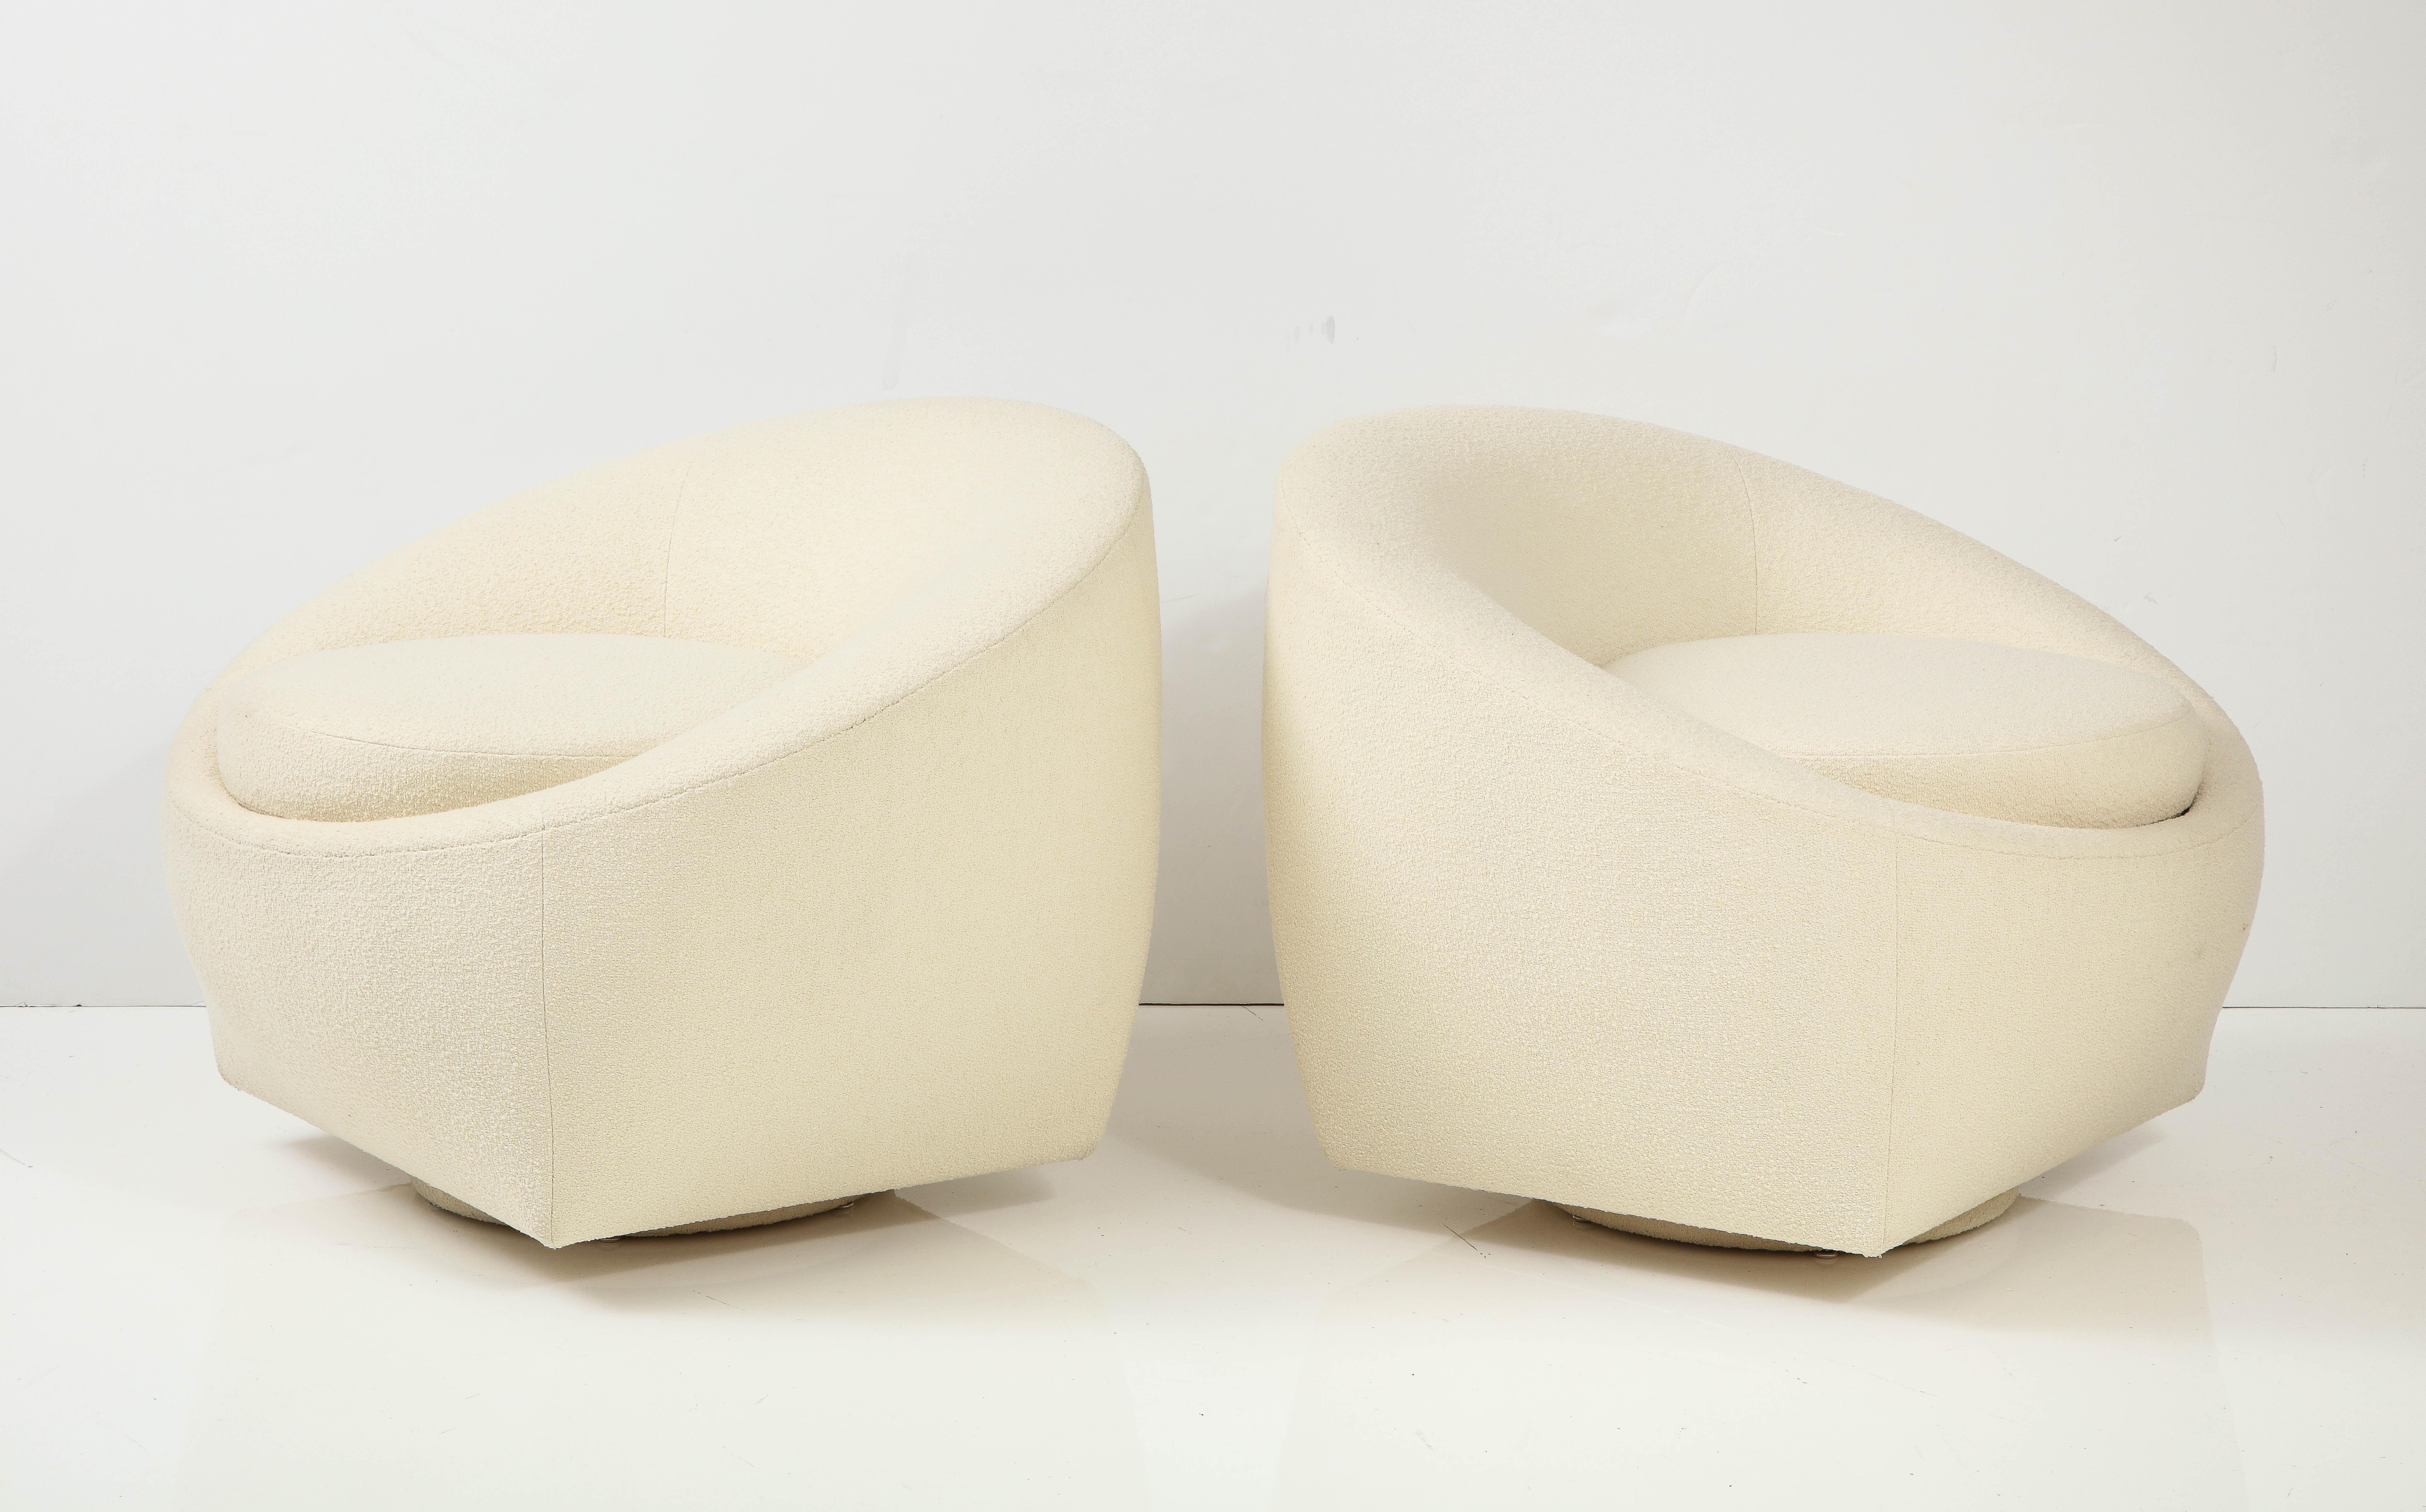 Pair of 1970s Mid-Century Modern Swivel Chairs In Good Condition For Sale In New York, NY